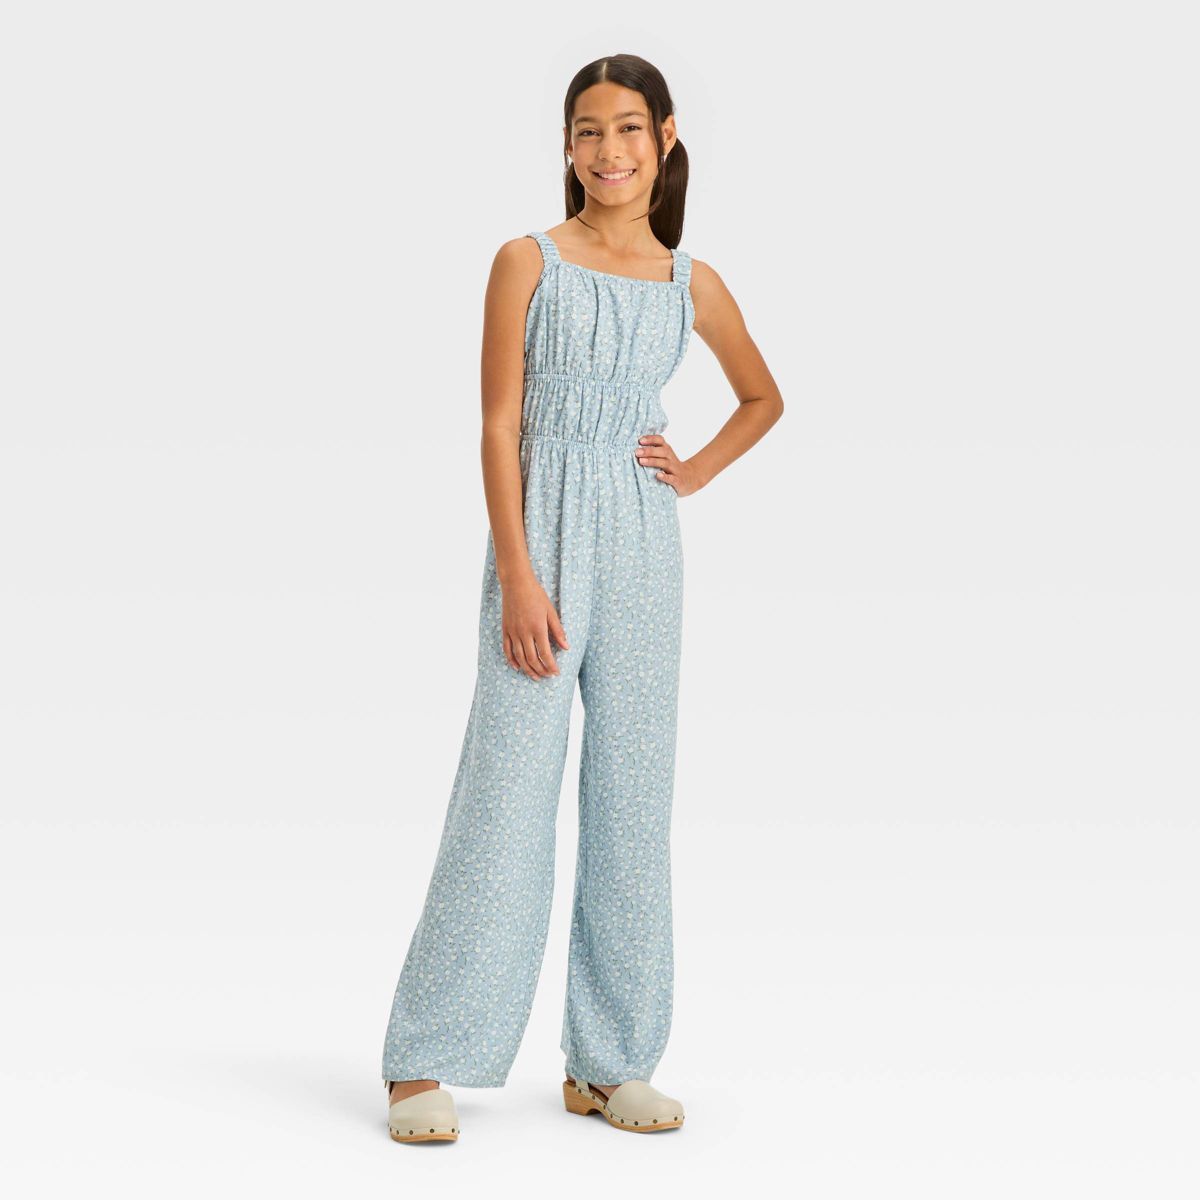 Girls' Ruched Waist and Strap Cut Out Back Floral Printed Jumpsuit - art class™ Blue L | Target